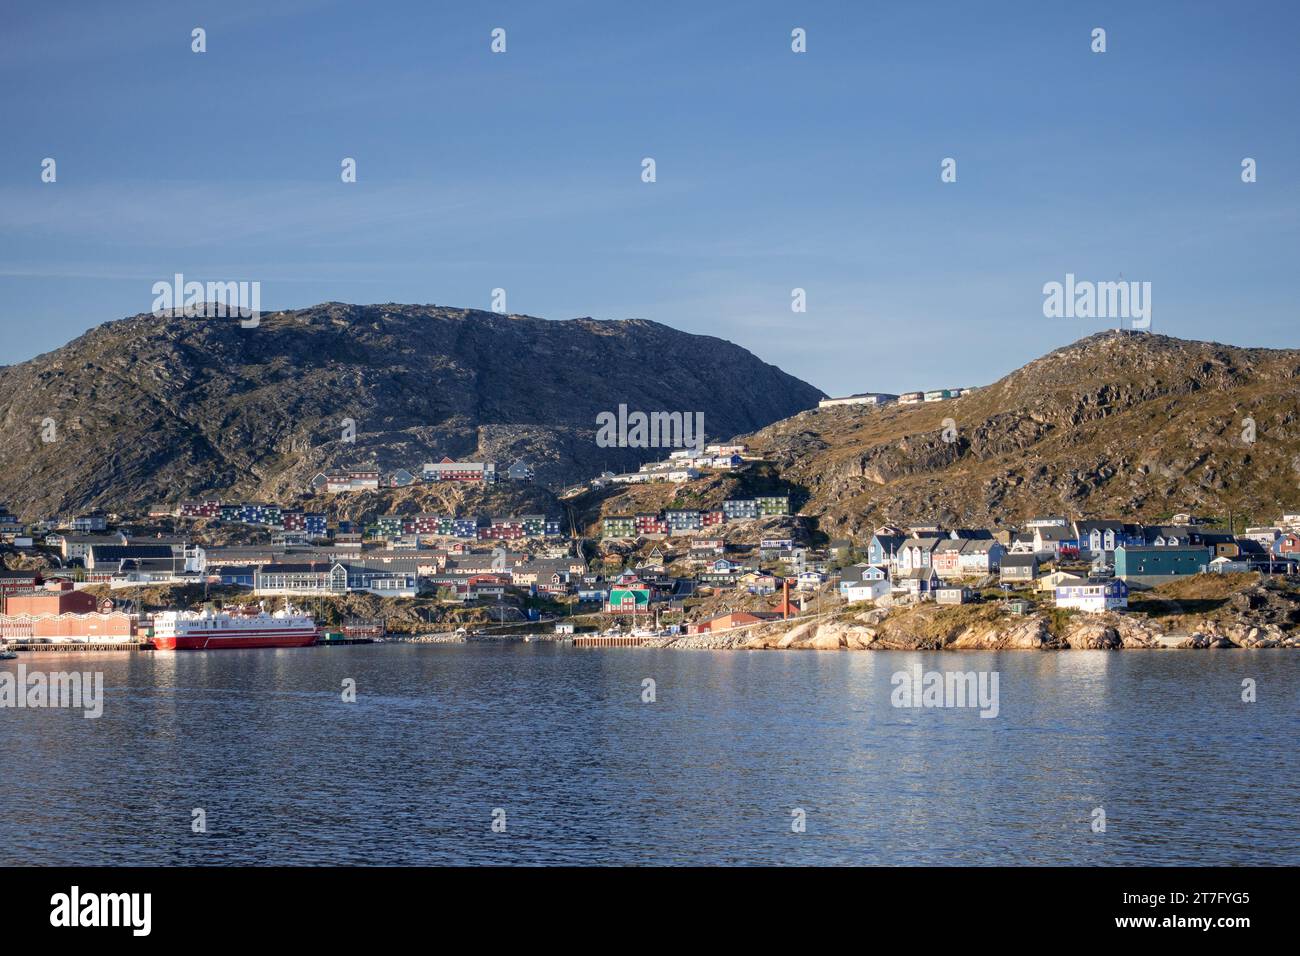 The Town Of Qaqortoq Greenland Seen From The Sea, Complete Skyline And Colourful Homes And Buildings Stock Photo